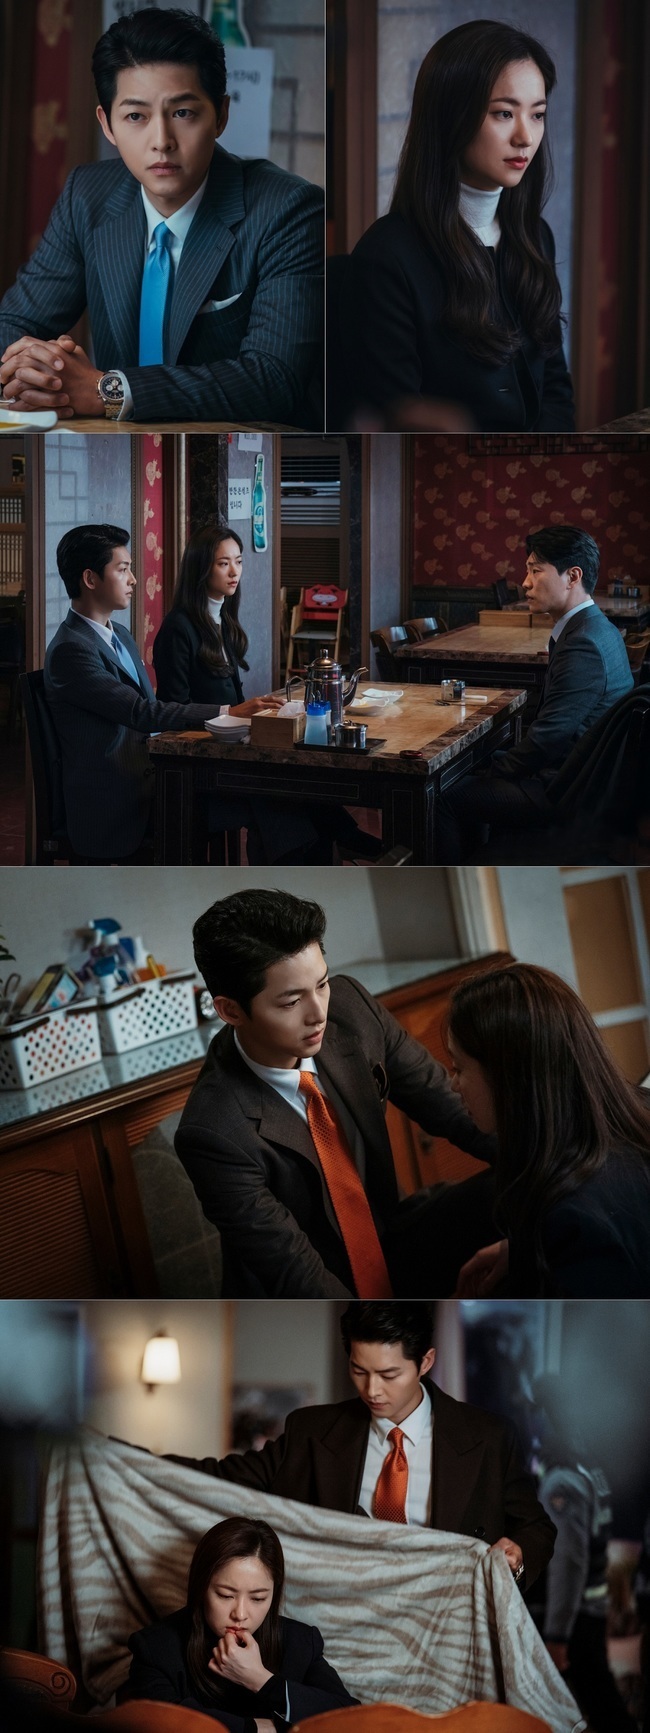 Song Joong-ki and Jeon Yeo-been go to find the finale villa.TVNs Saturday Drama Binsenjo (playplaywright Park Jae-beom/director Kim Hee-won) unveiled the images of Binsenjo (Song Joong-ki) and Hong Cha-young (Jeon Yeo-been) who went to find the finale Billon moving the Babel group on March 20.The frightened face of Hong Cha Young informs them of the unusual Danger.The photo shows Vincenzo and Hong Cha-young, who started looking for Babels real boss, and they are nervous to find out even the little clues that the enemy has shed.Vincenzo and Hong Cha-young, who faced prosecutor Jung In-kook (Ko Sang-ho), raise questions about what clues the two sharp-eyed people have found.The face that is afraid that it is not like the single Hong Cha-young who does not lose to anyone realizes that the threat of the Billons has become more intense.Vincenzos affection for covering the blanket to such a black tea catches his eye.In the trailer released earlier, the figure of the black shadow wandering around the neighborhood of Hong Cha Young and Vincenzo, screaming and backing, heightened the sense of Danger.